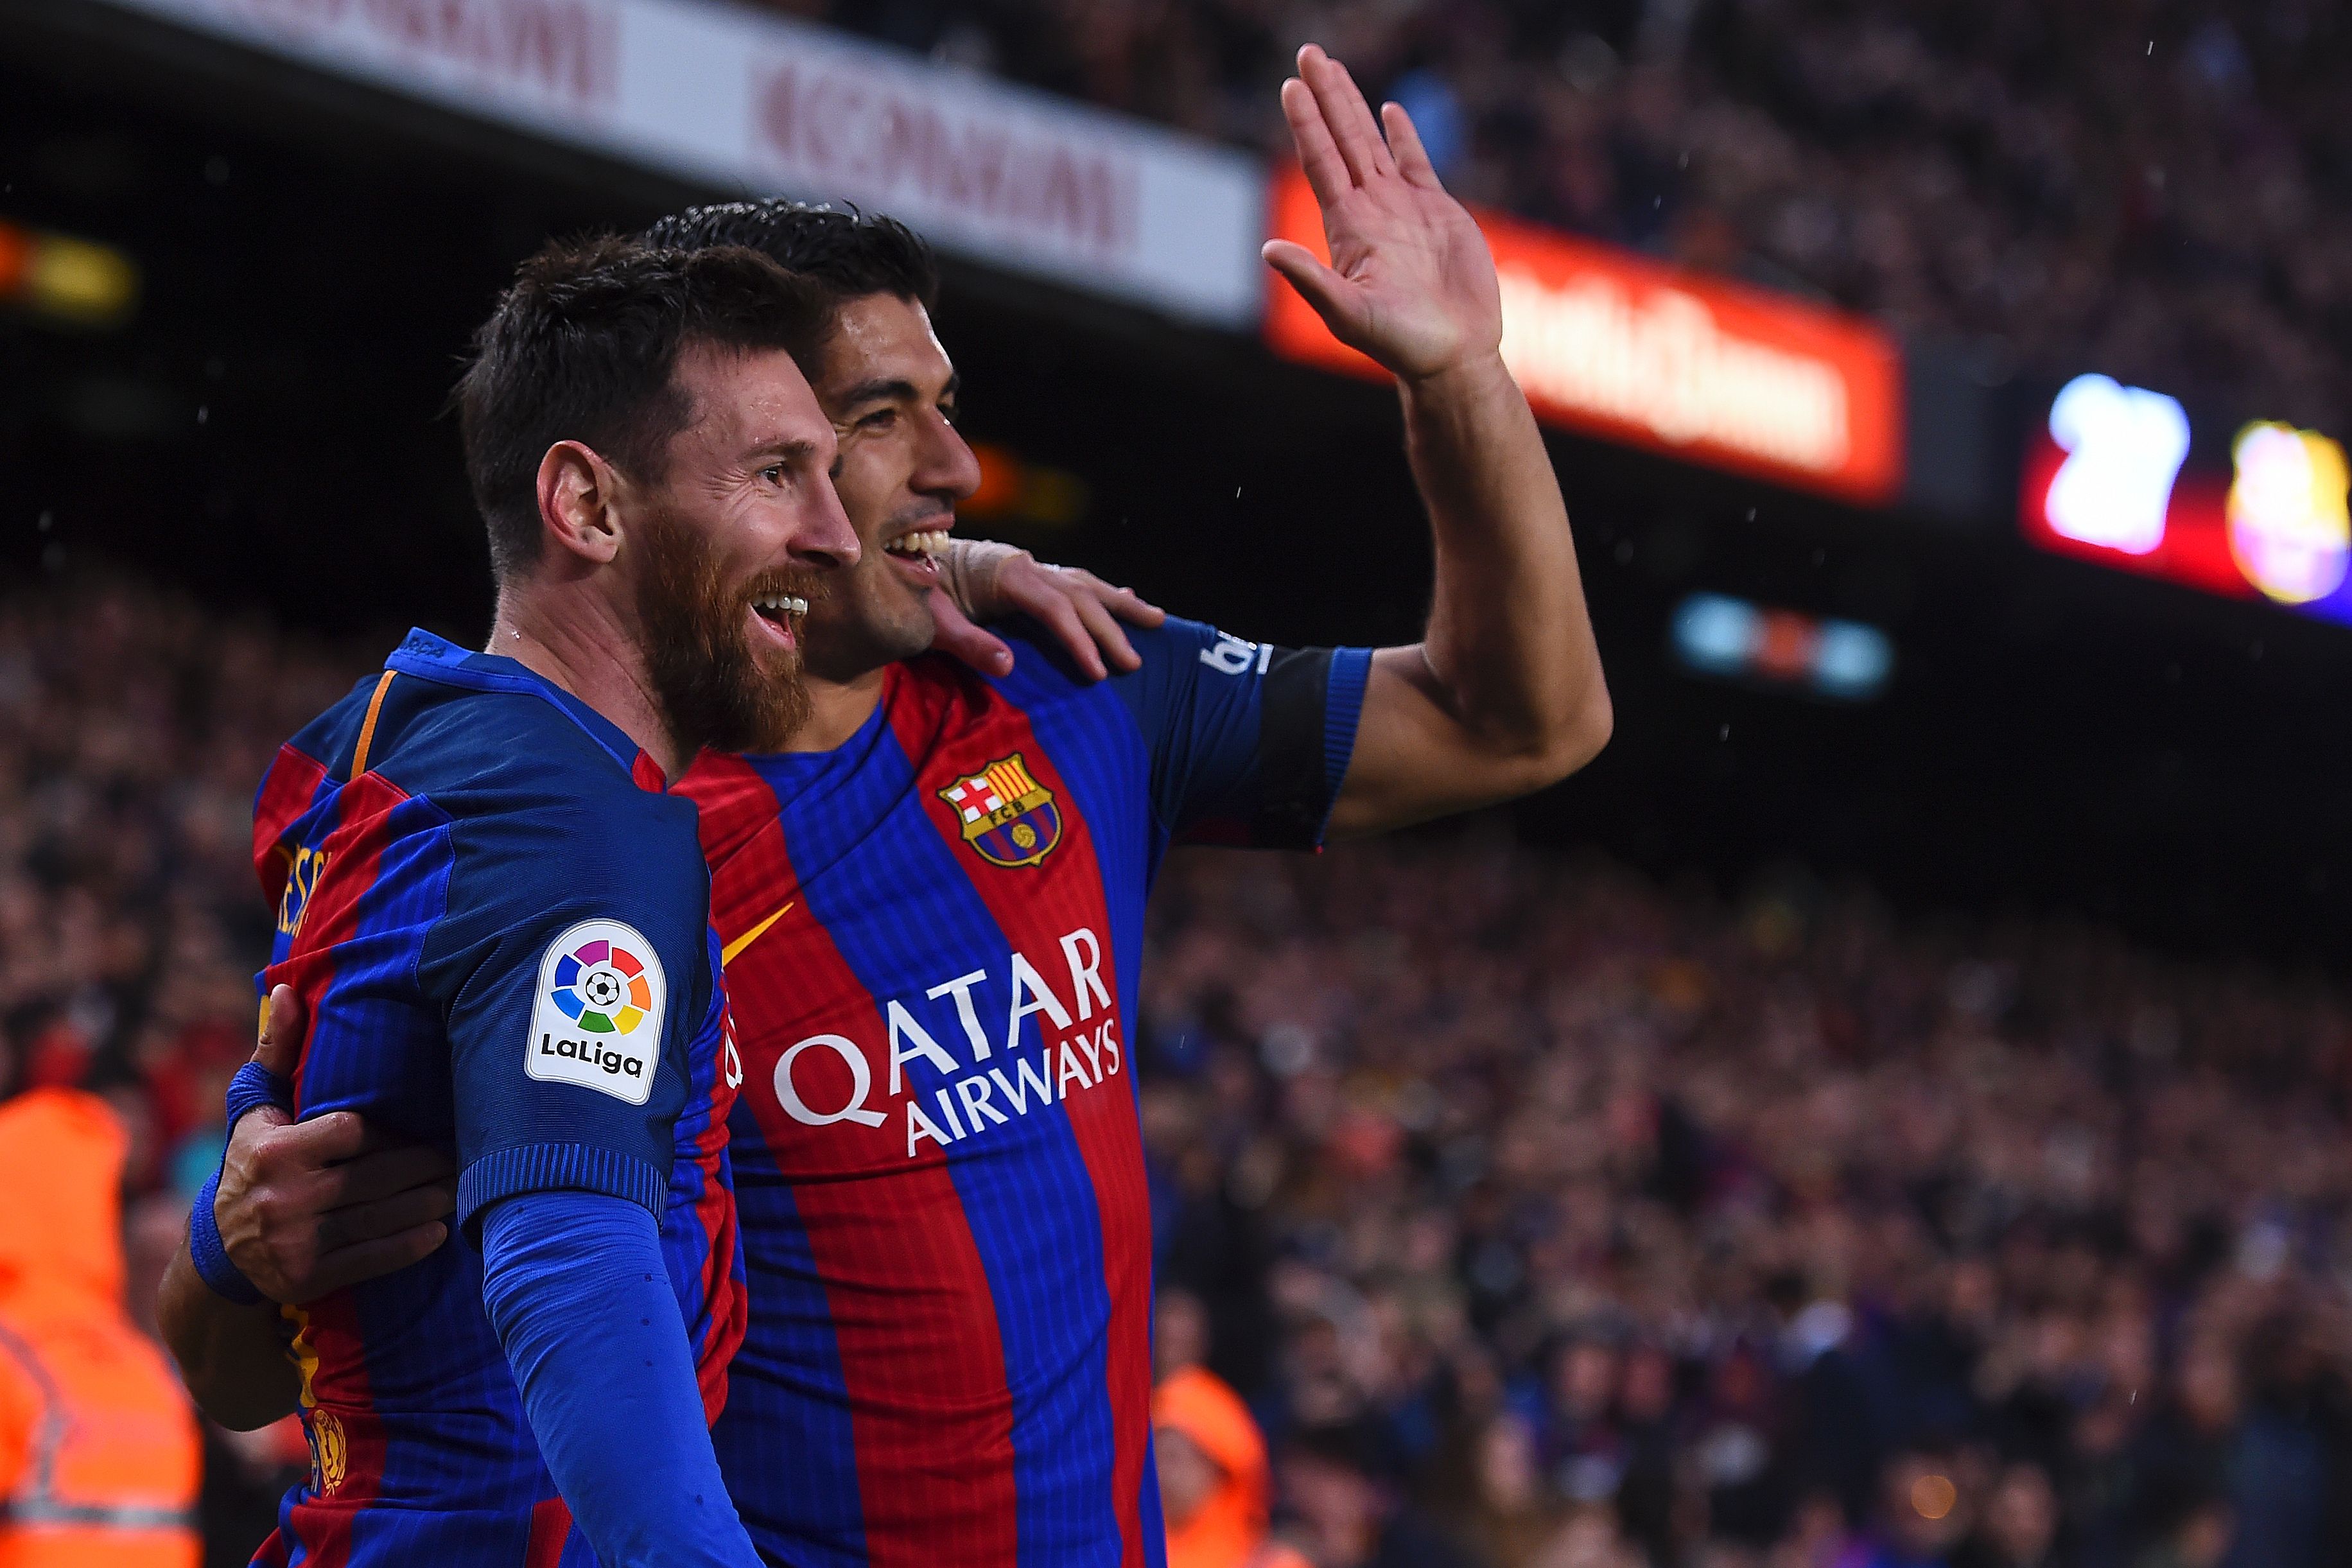 TOPSHOT - Barcelona's Argentinian forward Lionel Messi (L) is congratulated by Barcelona's Uruguayan forward Luis Suarez after scoring during the Spanish league football match FC Barcelona vs Sevilla FC at the Camp Nou stadium in Barcelona on April 5, 2017. / AFP PHOTO / Josep LAGO        (Photo credit should read JOSEP LAGO/AFP/Getty Images)